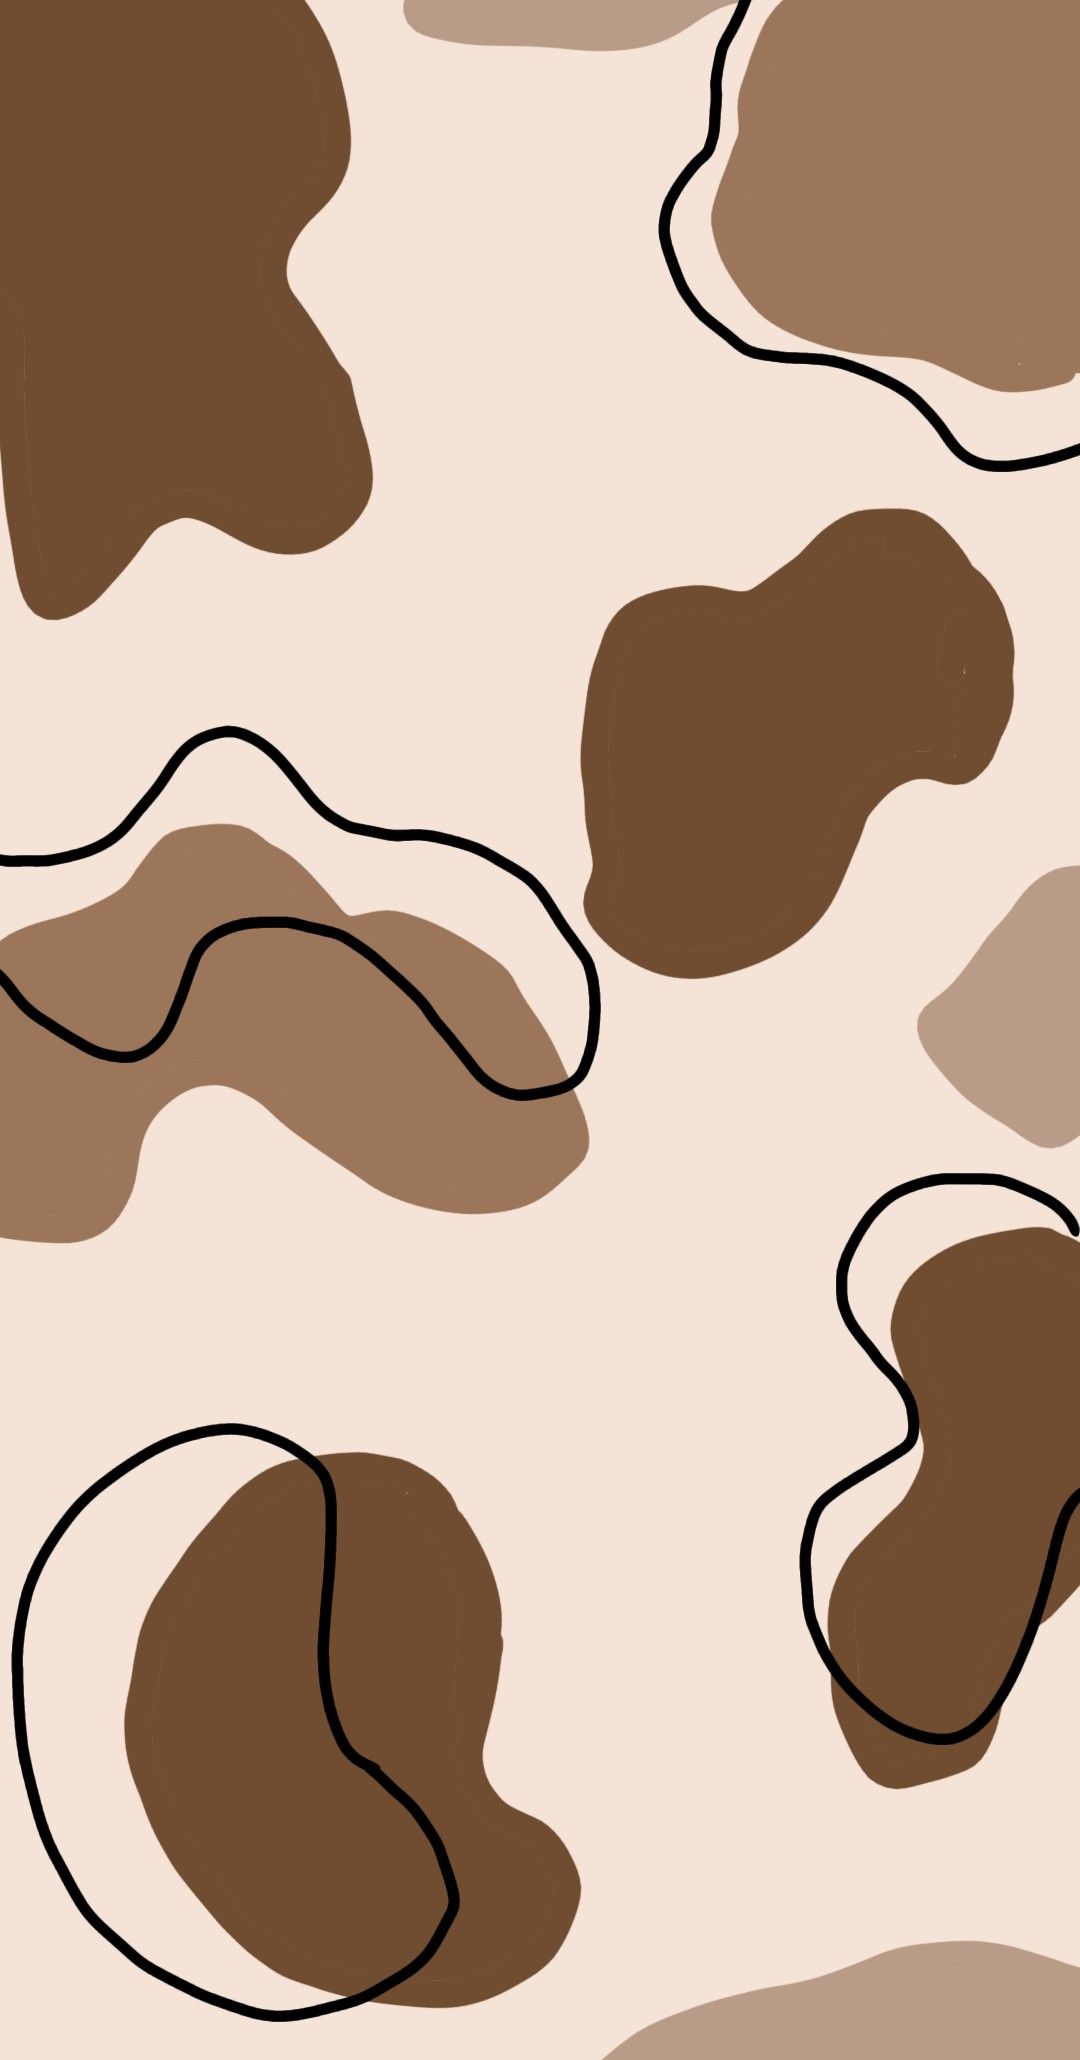 A brown and white camo pattern - Brown, light brown, cow